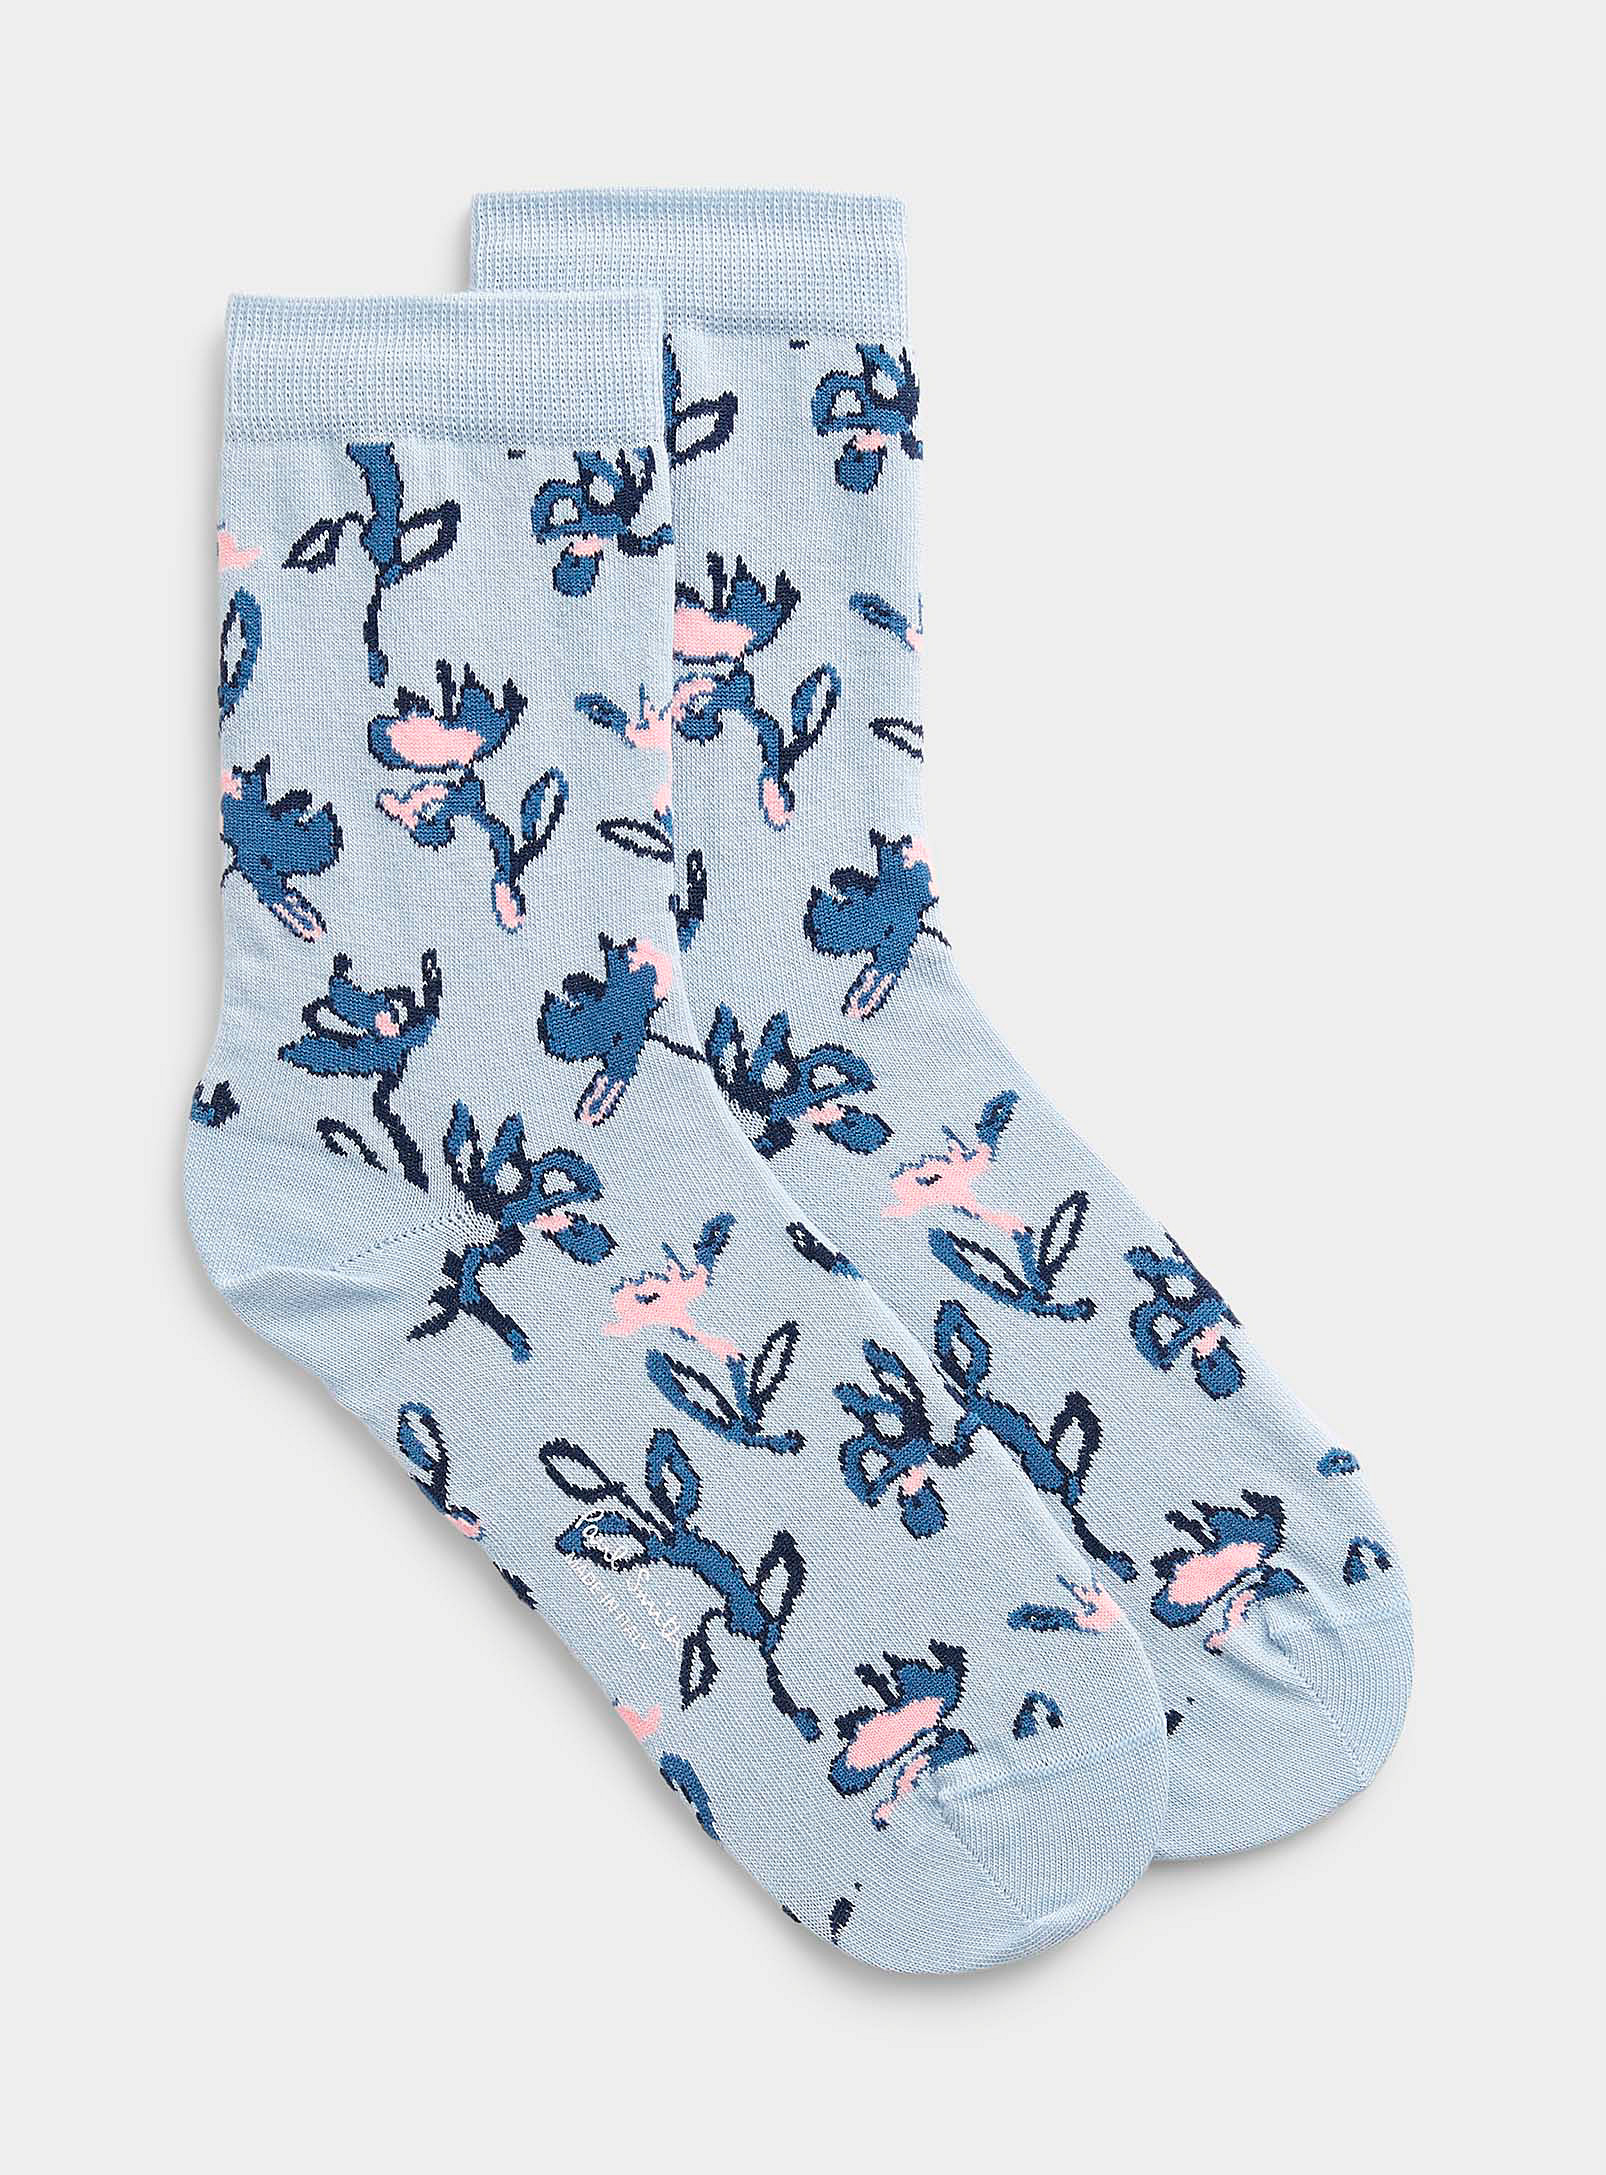 Paul Smith Bluish Floral Sock In Blue